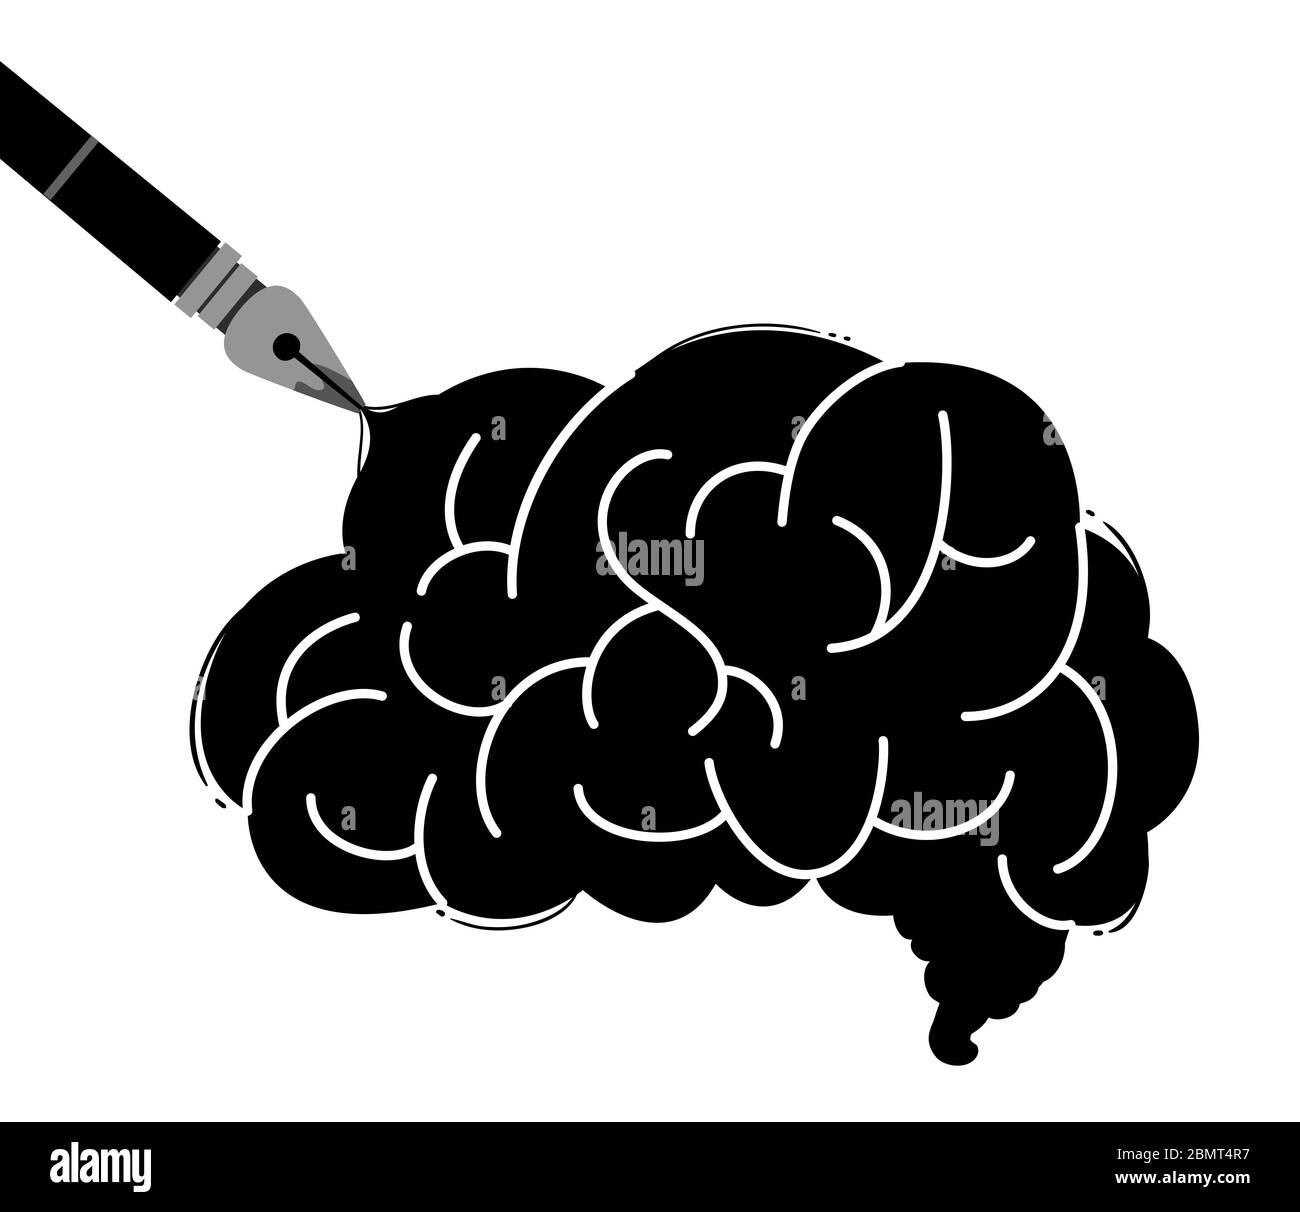 Illustration of a Black Brain Drawn From a Fountain Pen Stock Photo